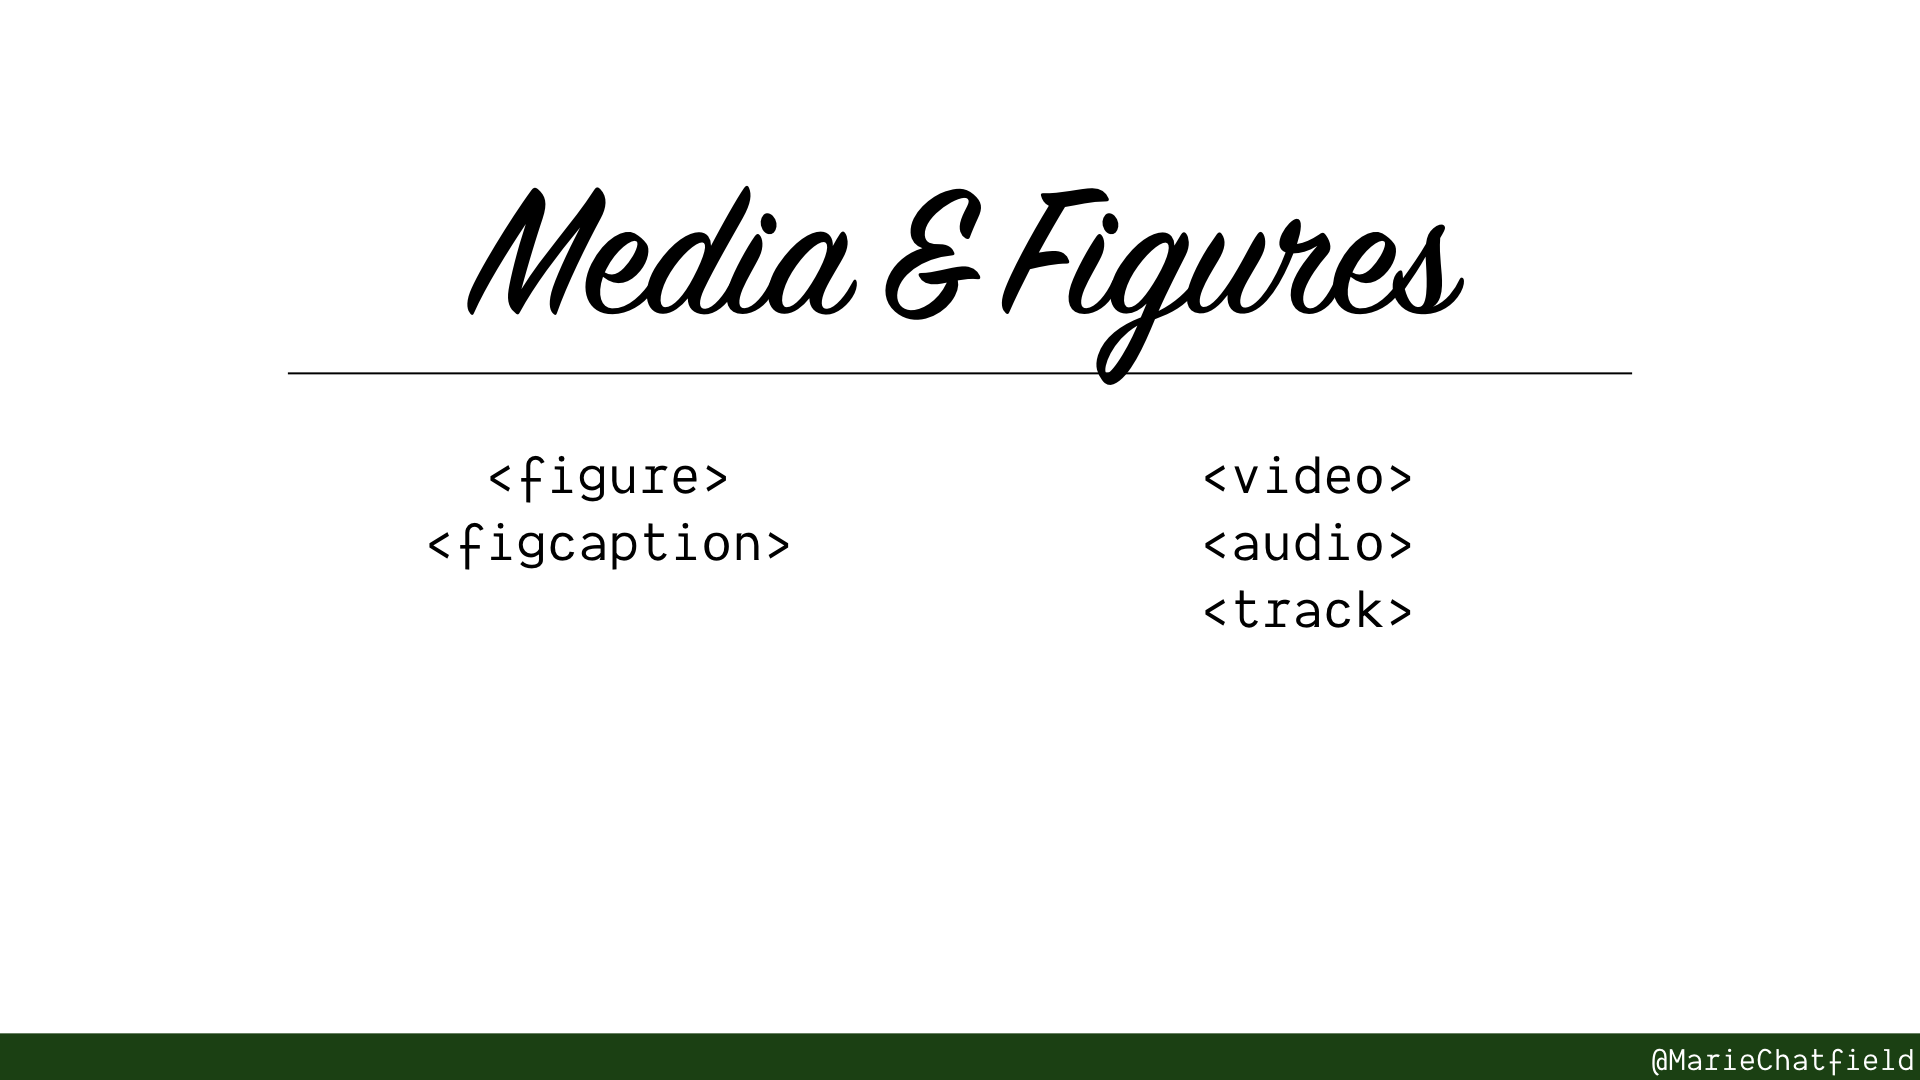 Slide of Media & Figures with HTML elements listed